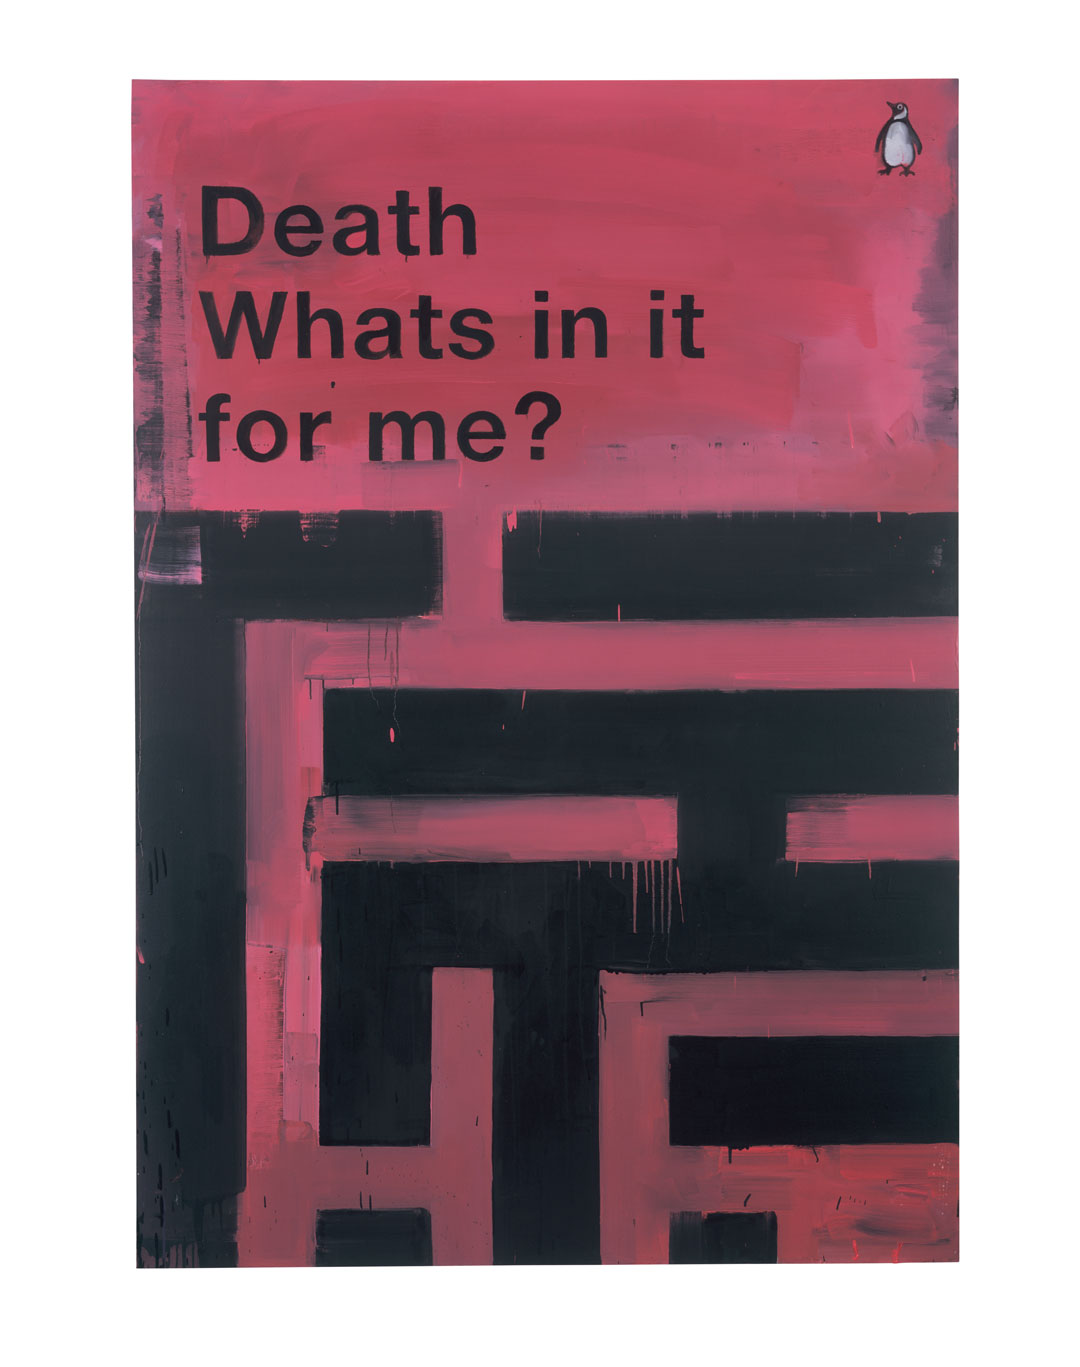 Death – What’s In It For Me? (2008) by Harland Miller